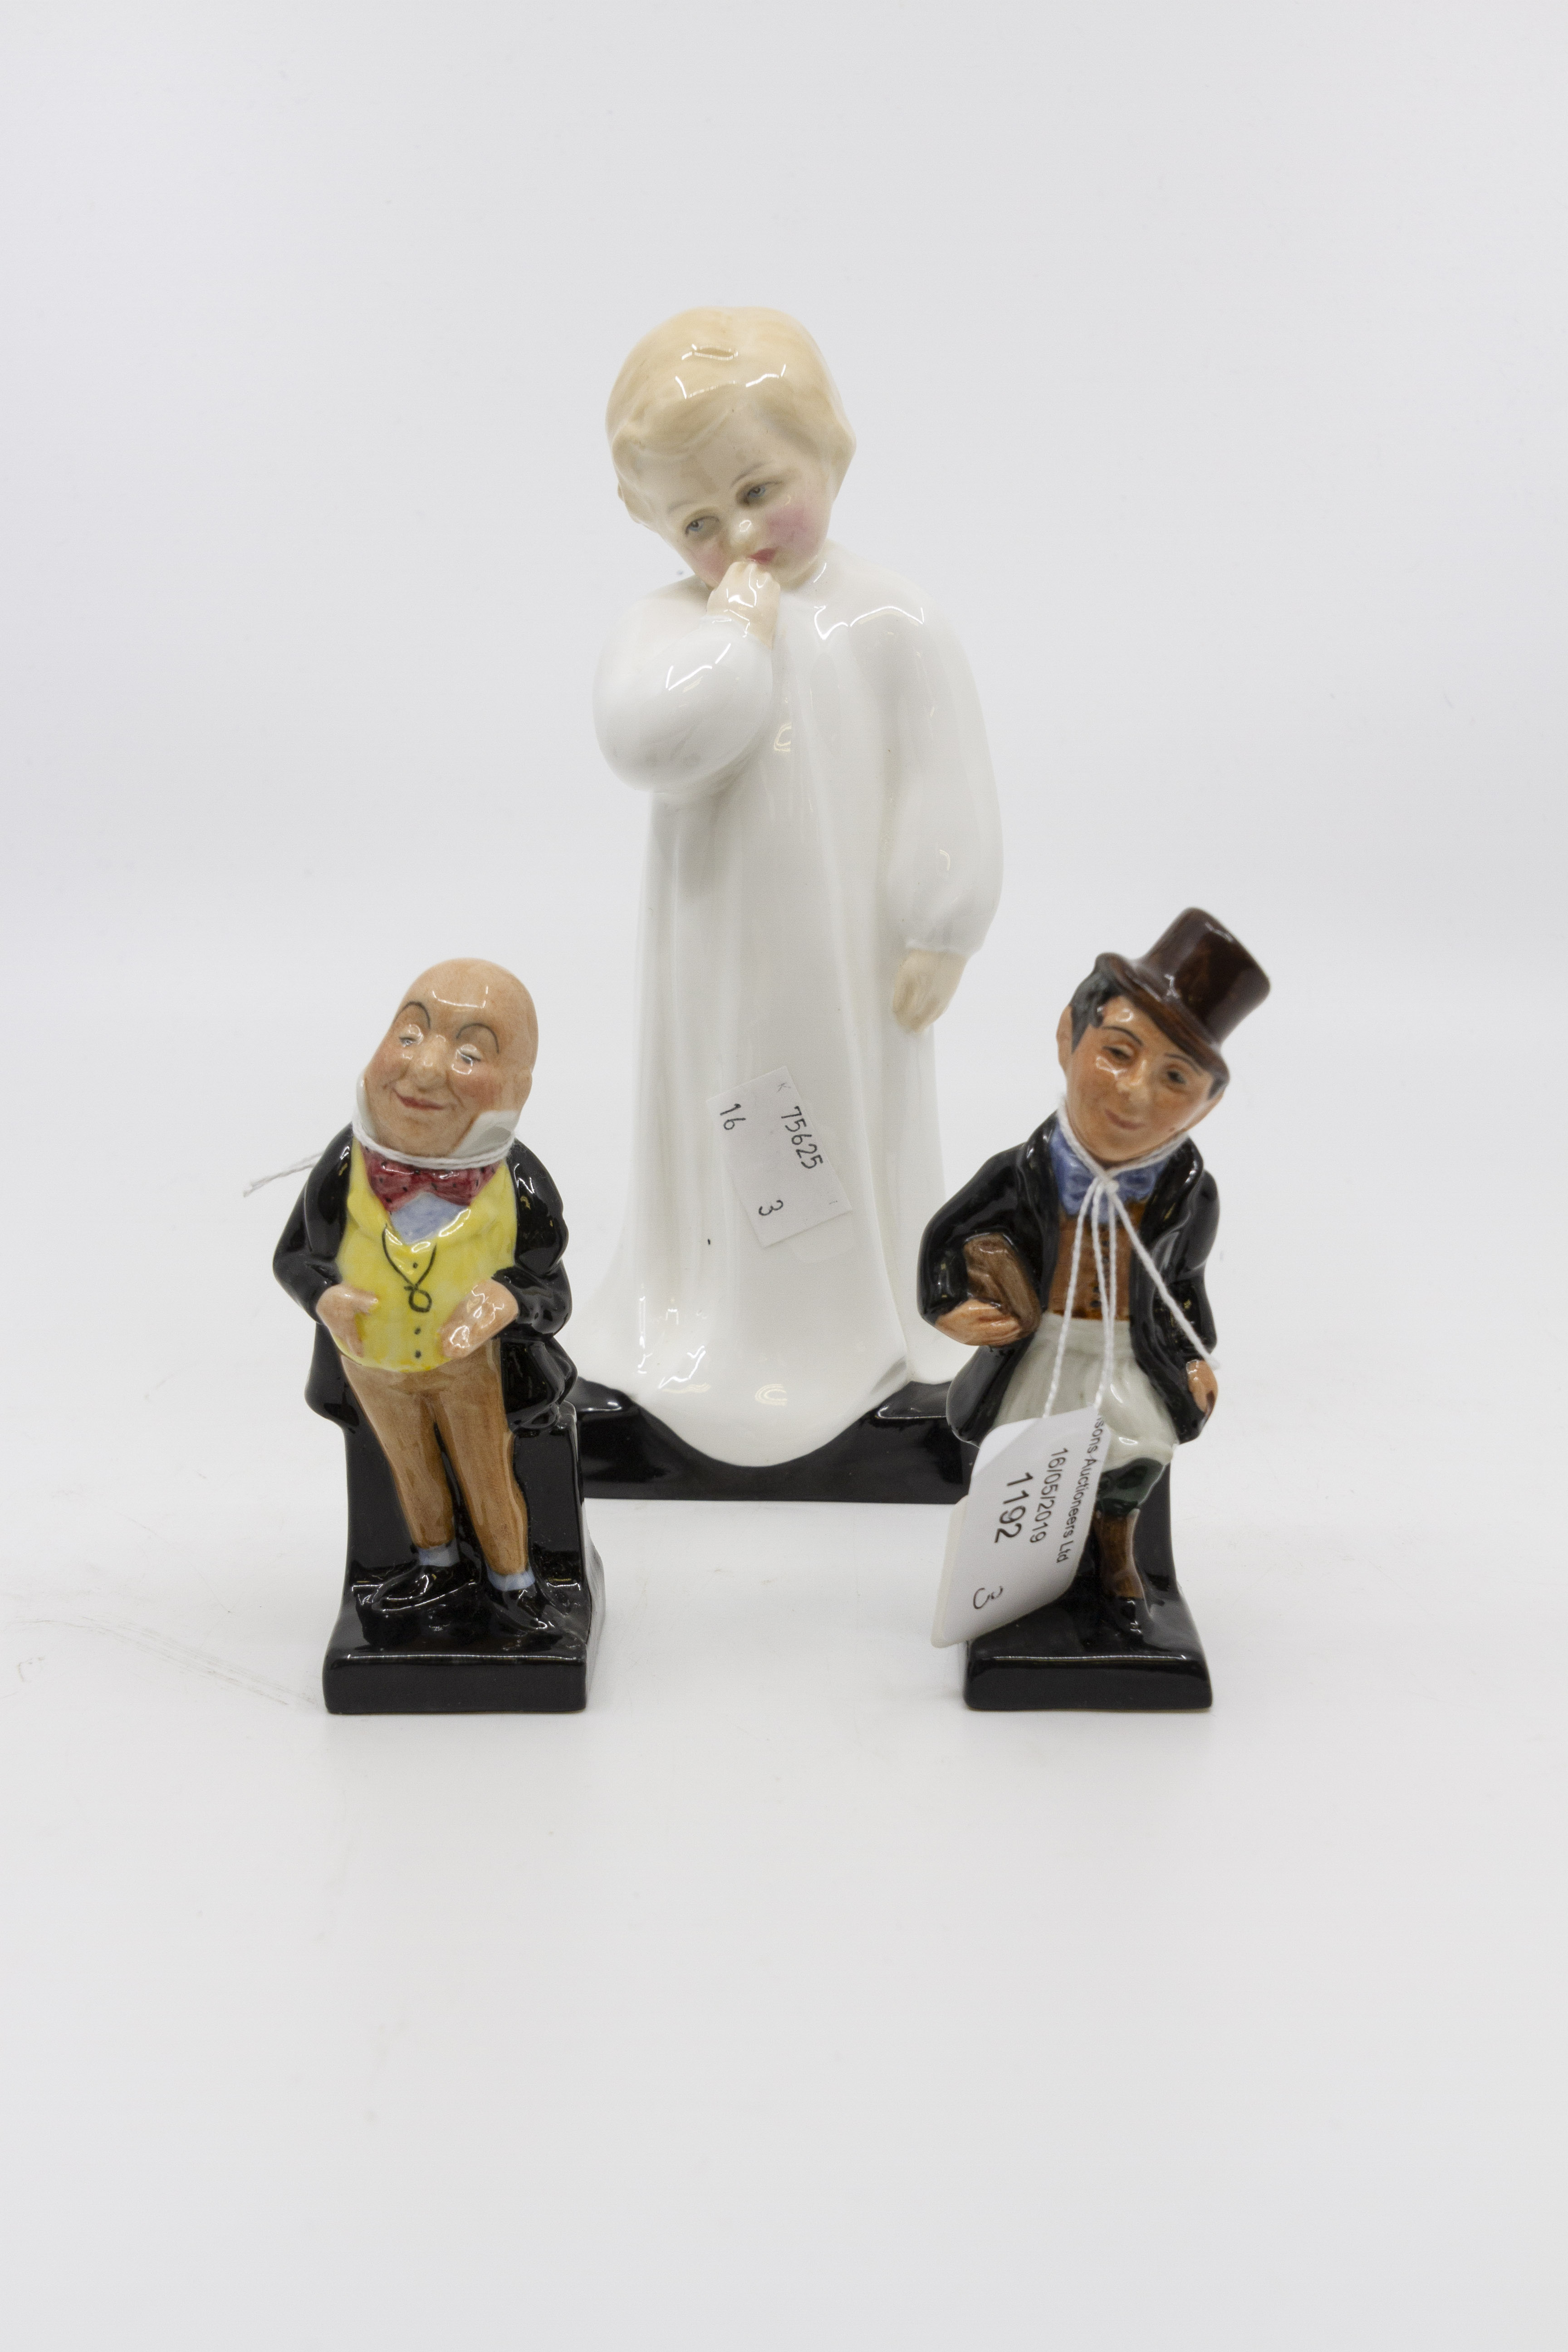 Royal Doulton Darling statue HN1319 and pair of Royal Doulton Dickens figures Trotty Veere statue,